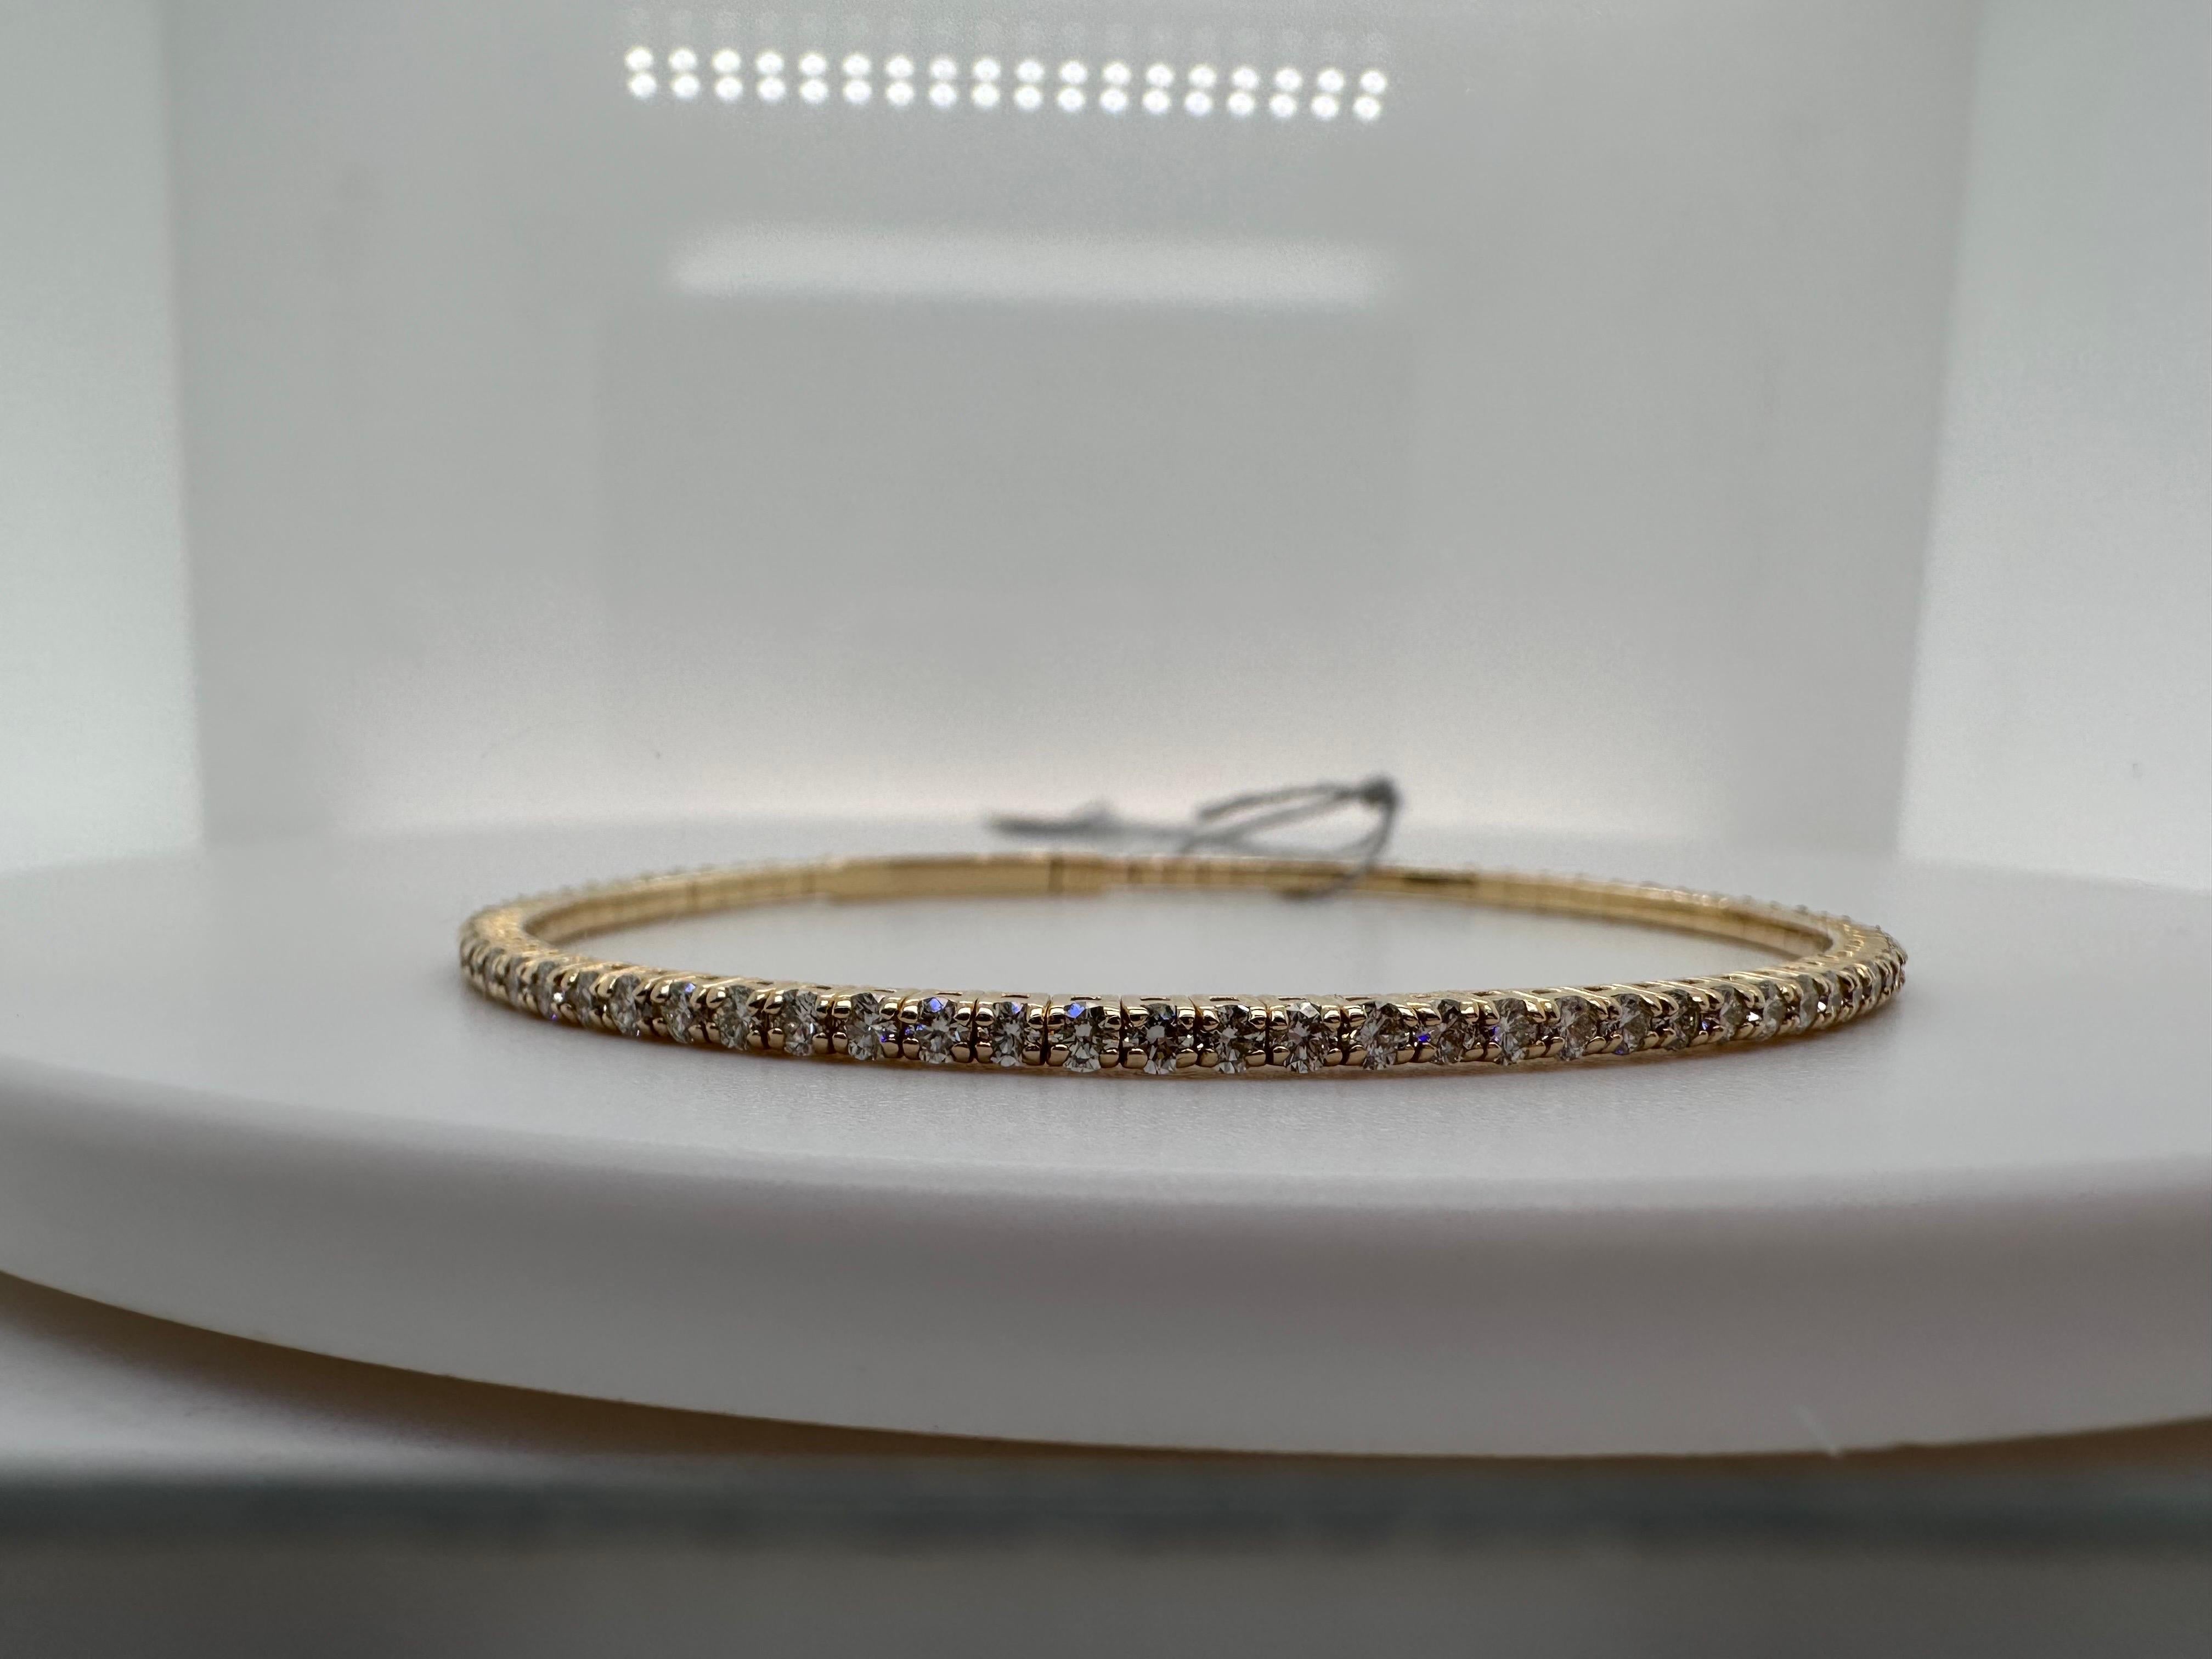 Simple and elegant diamond bracelet super comfortable and flexible made in 14KT gold!

Metal Type: 14KT
Gram Weight:8.20 grams 
Natural Diamond(s): 
Color: G
Cut:Round Brilliant
Carat: 2.25ct
Clarity: VS (average)
Item: T5000
Certificate of